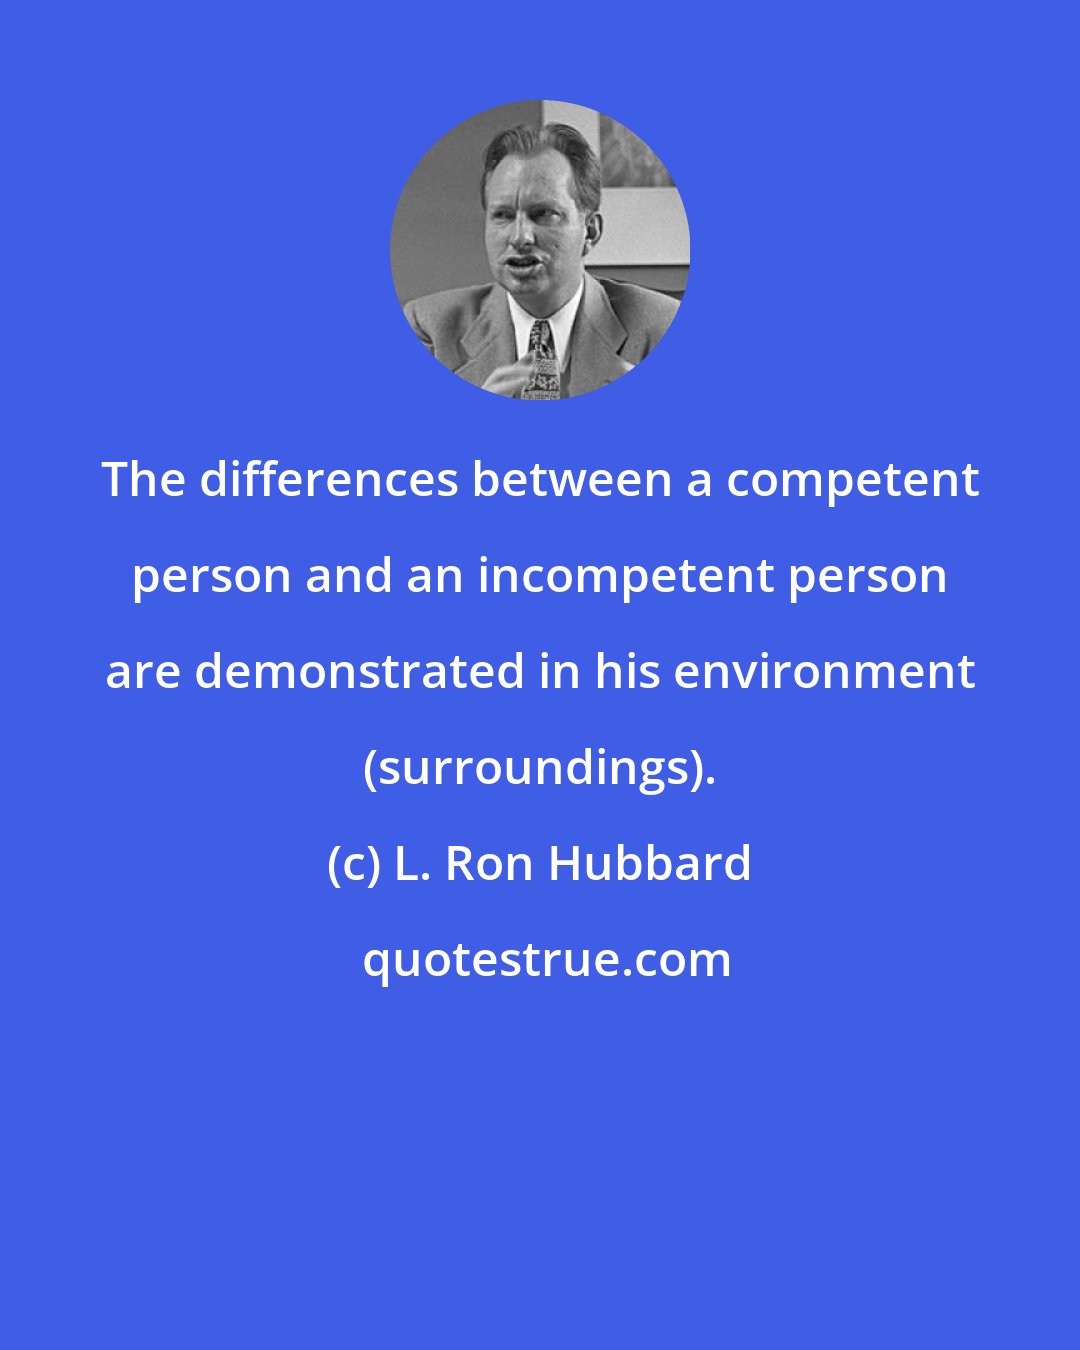 L. Ron Hubbard: The differences between a competent person and an incompetent person are demonstrated in his environment (surroundings).